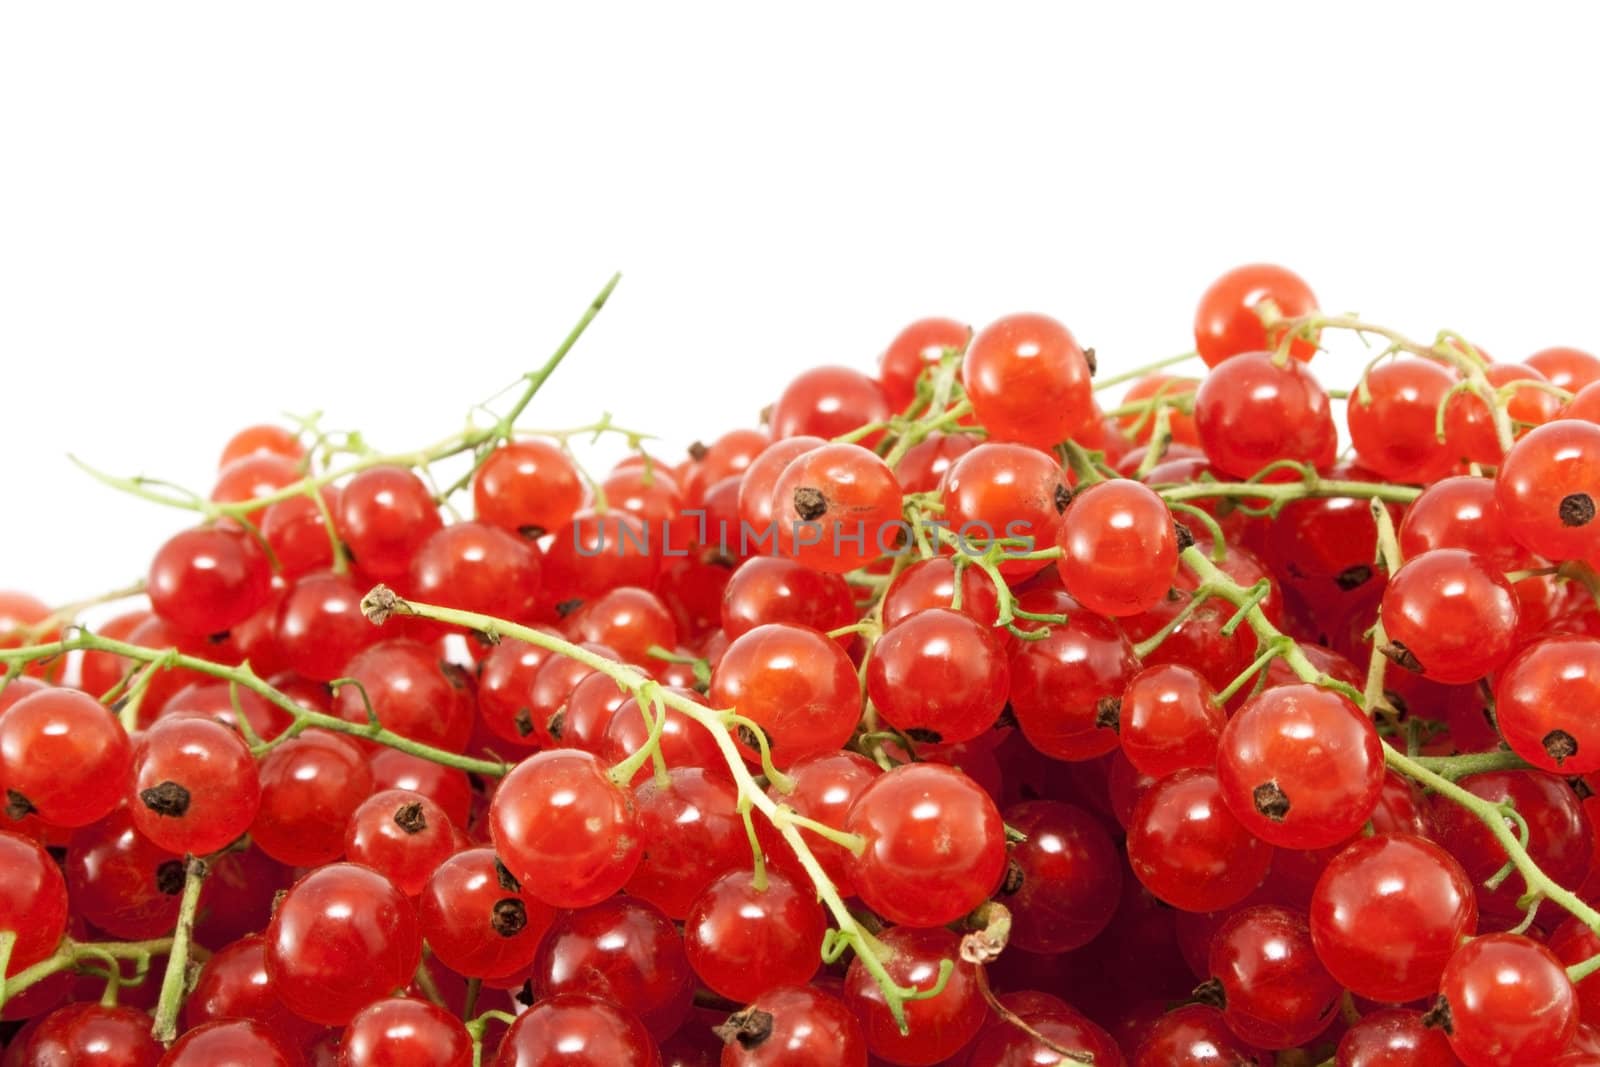 Macro photo of fresh red currant berries against white background